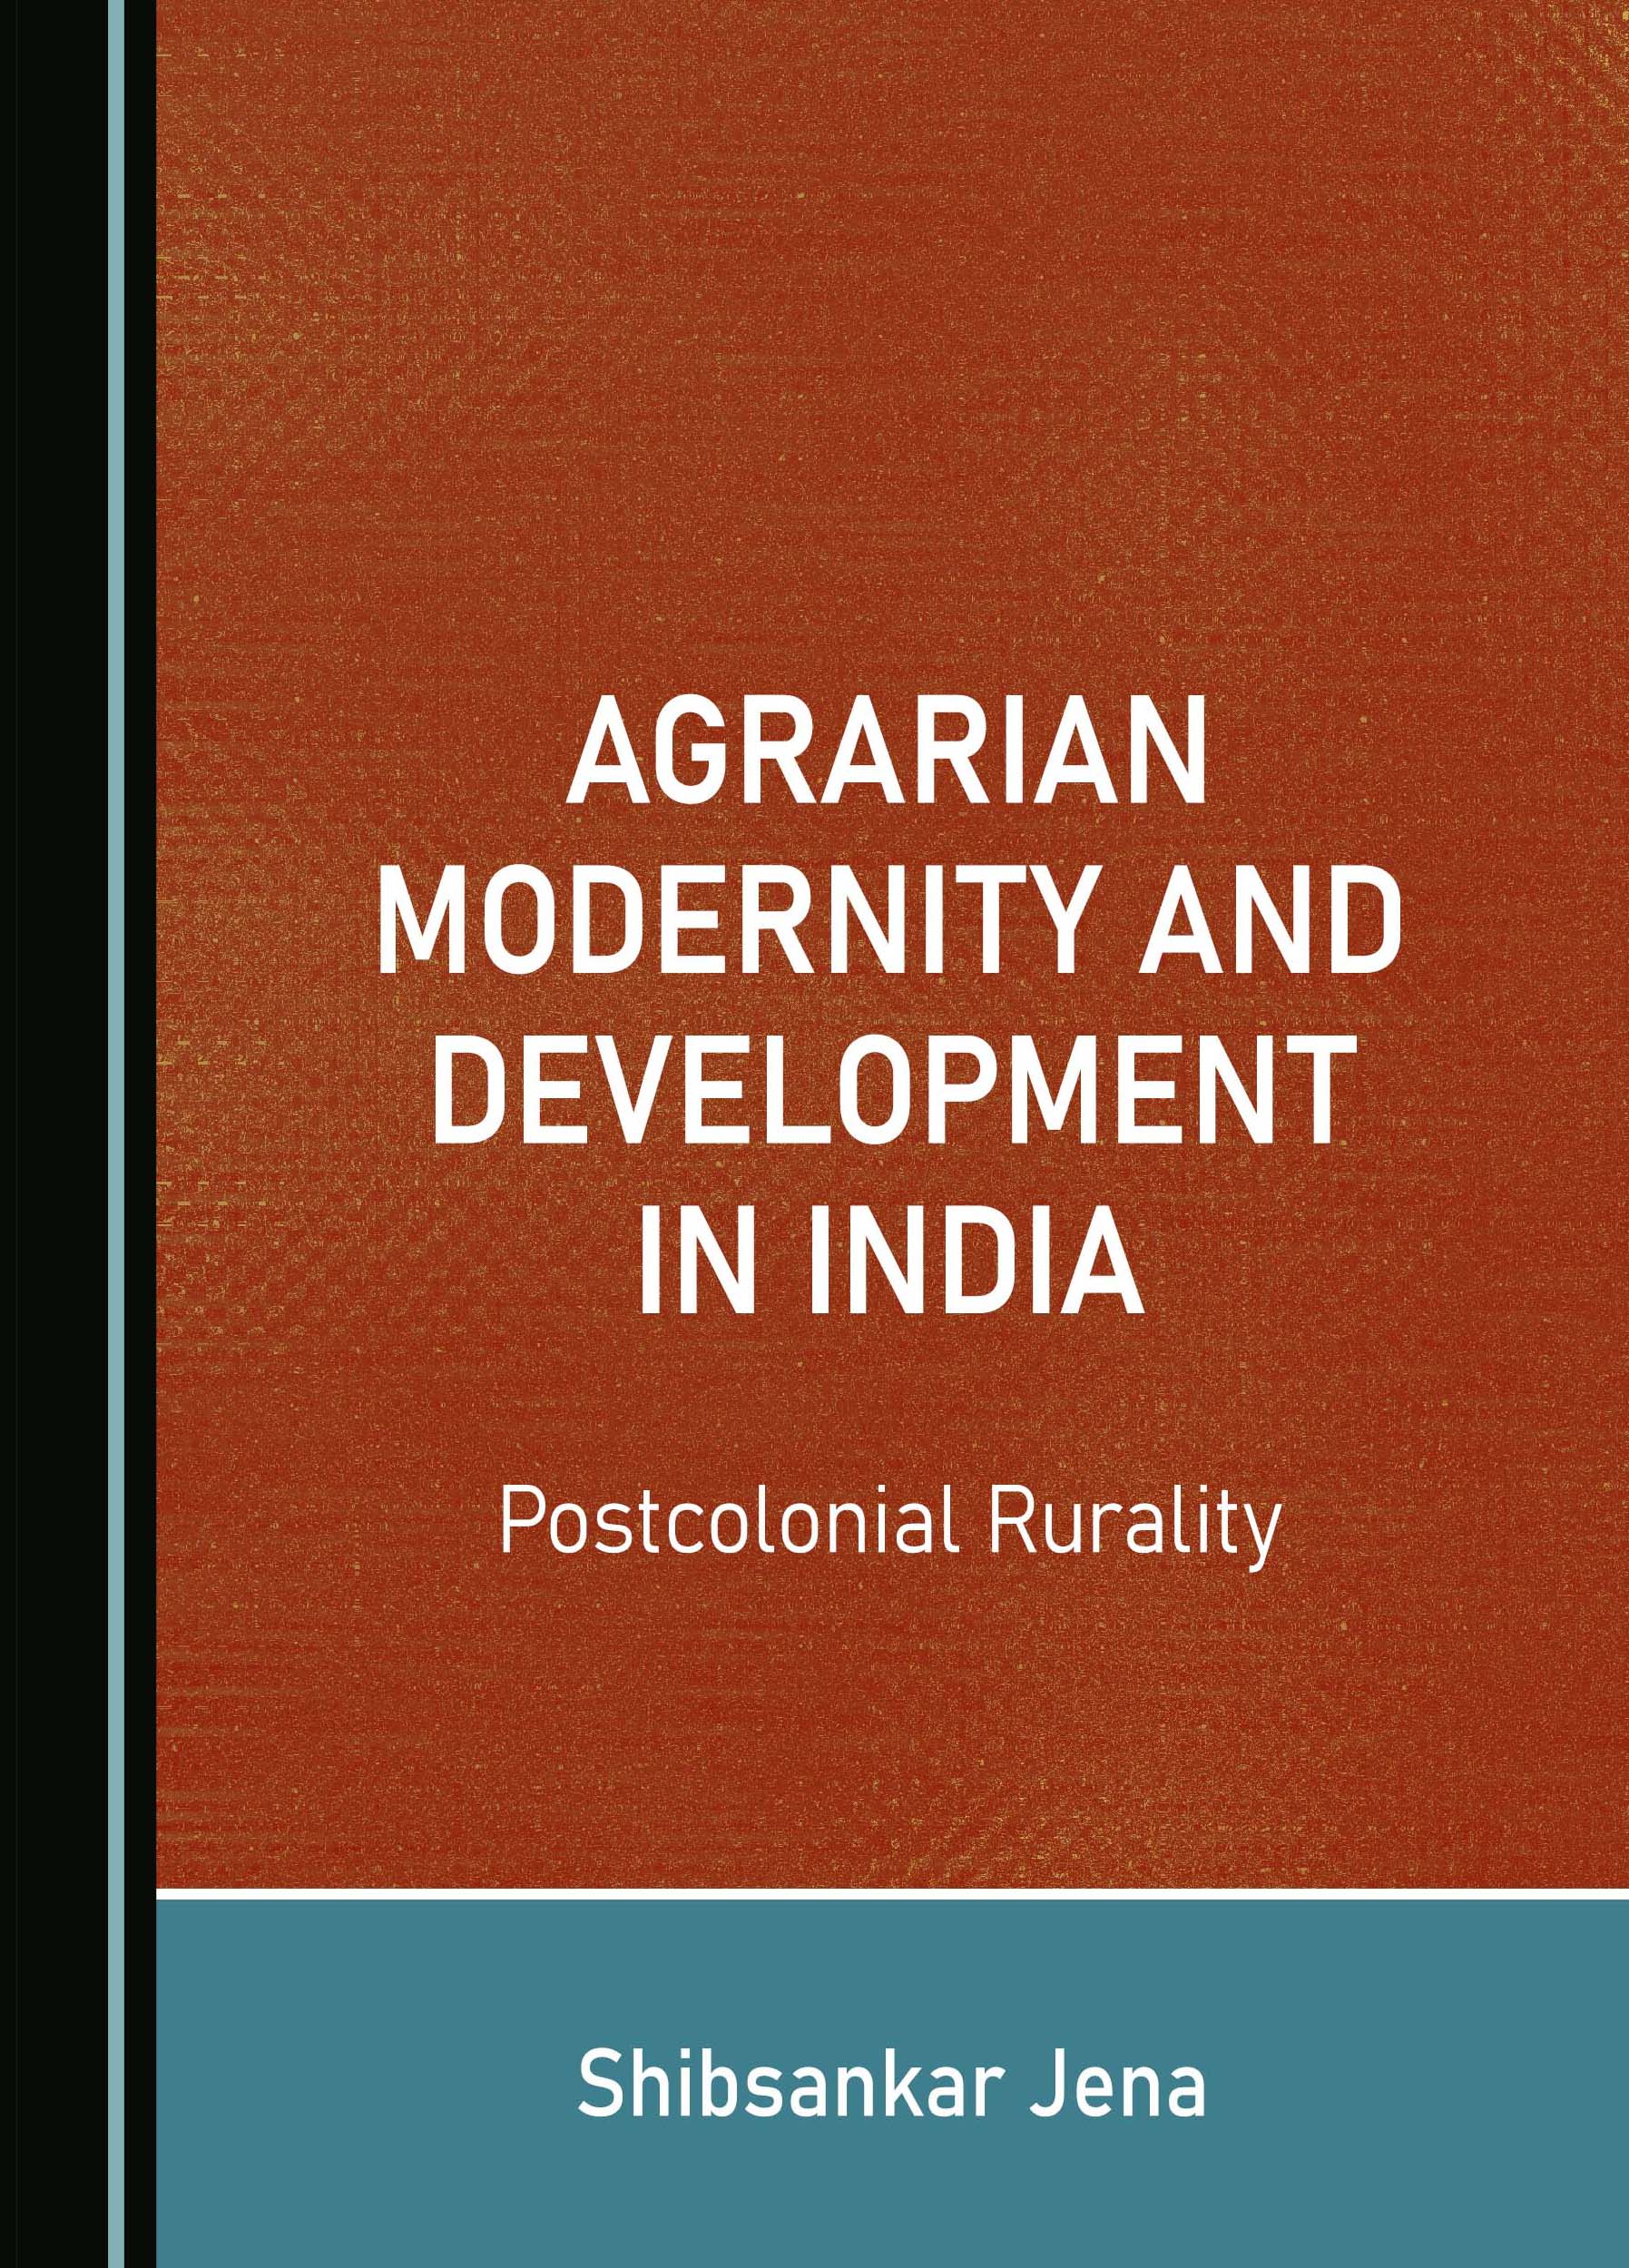 Agrarian Modernity and Development in India: Postcolonial Rurality